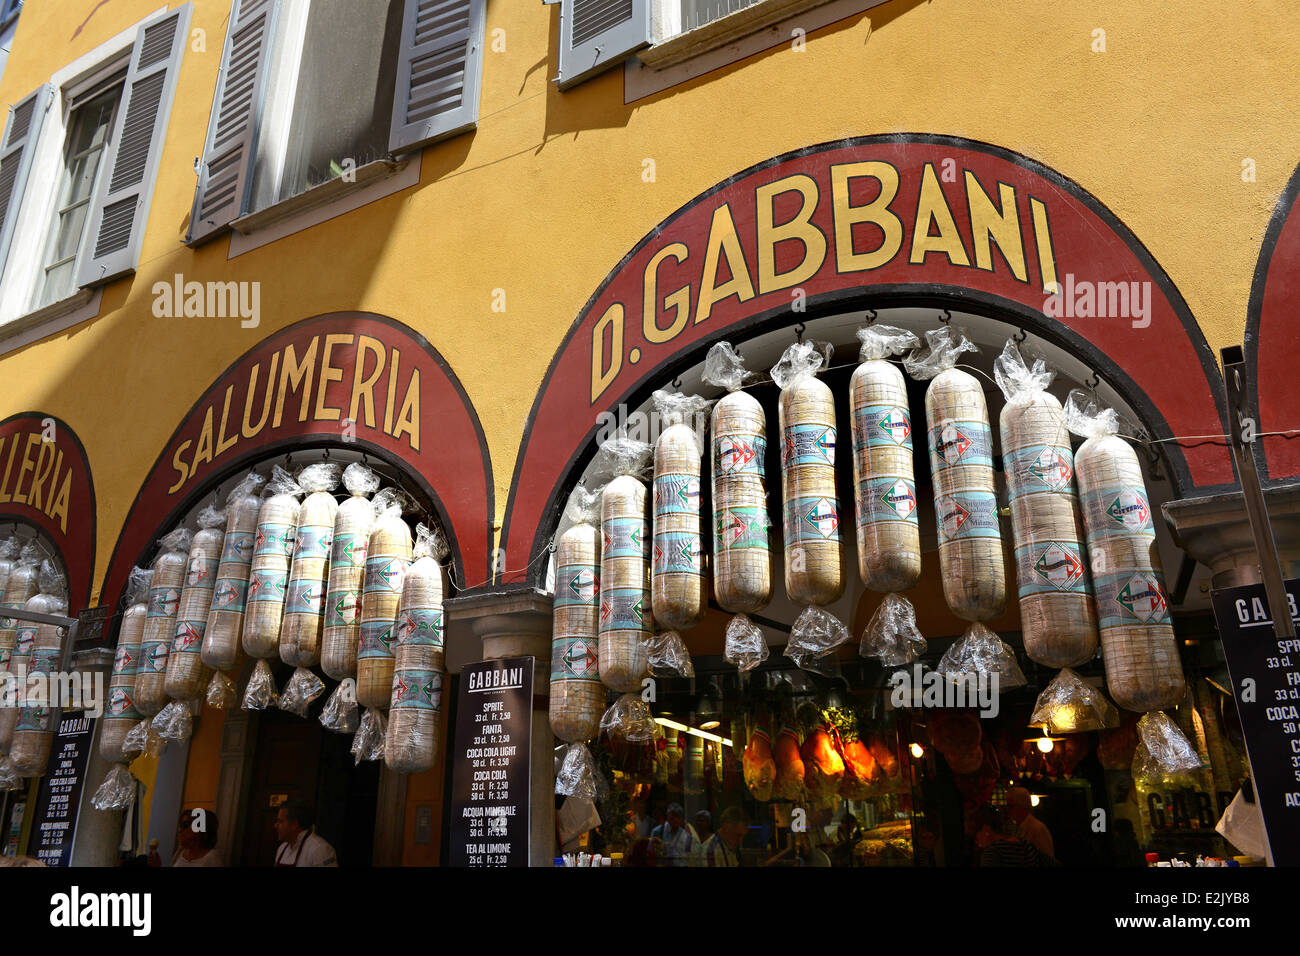 Lugano Switzerland the Gabbani delicatessen selling salame sausages and cured meats Stock Photo